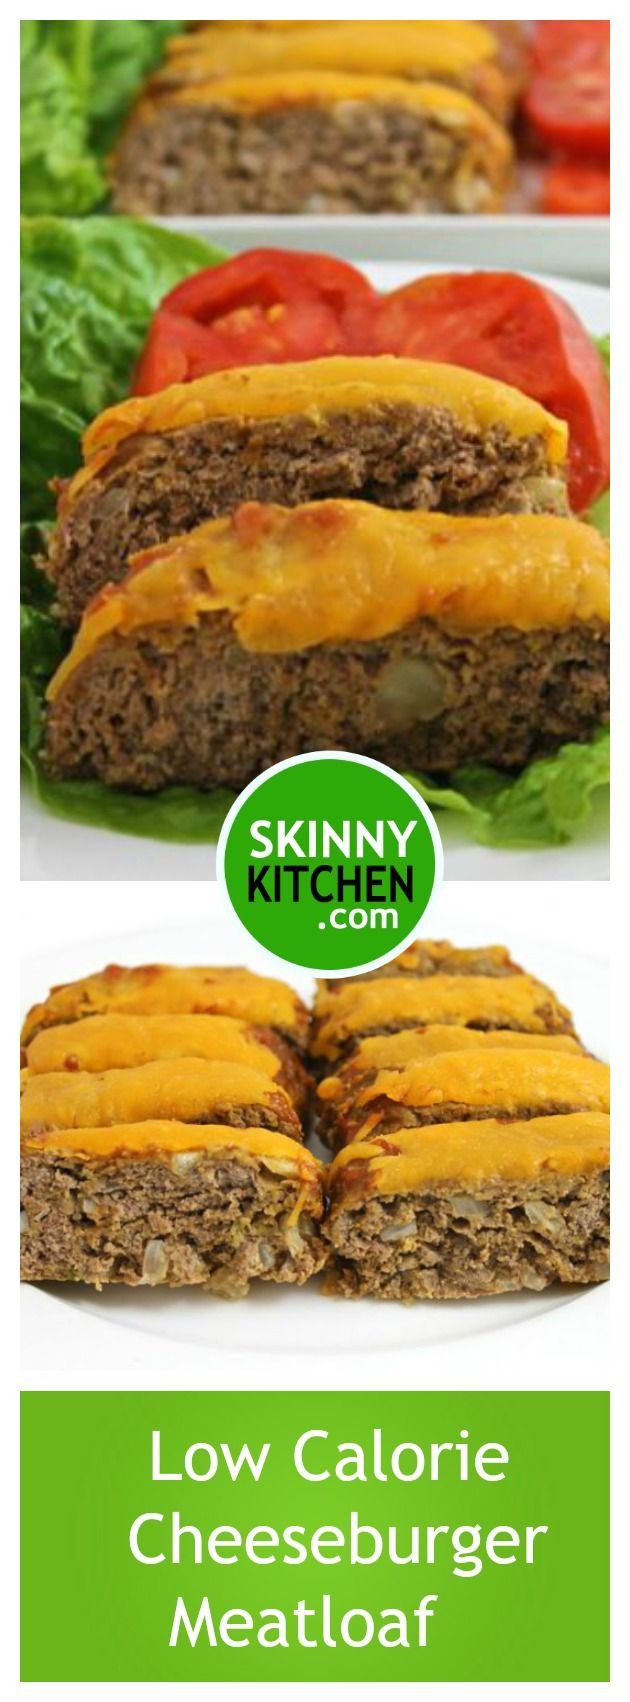 Low Calorie Meatloaf Recipe
 Low Calorie Cheeseburger Meatloaf